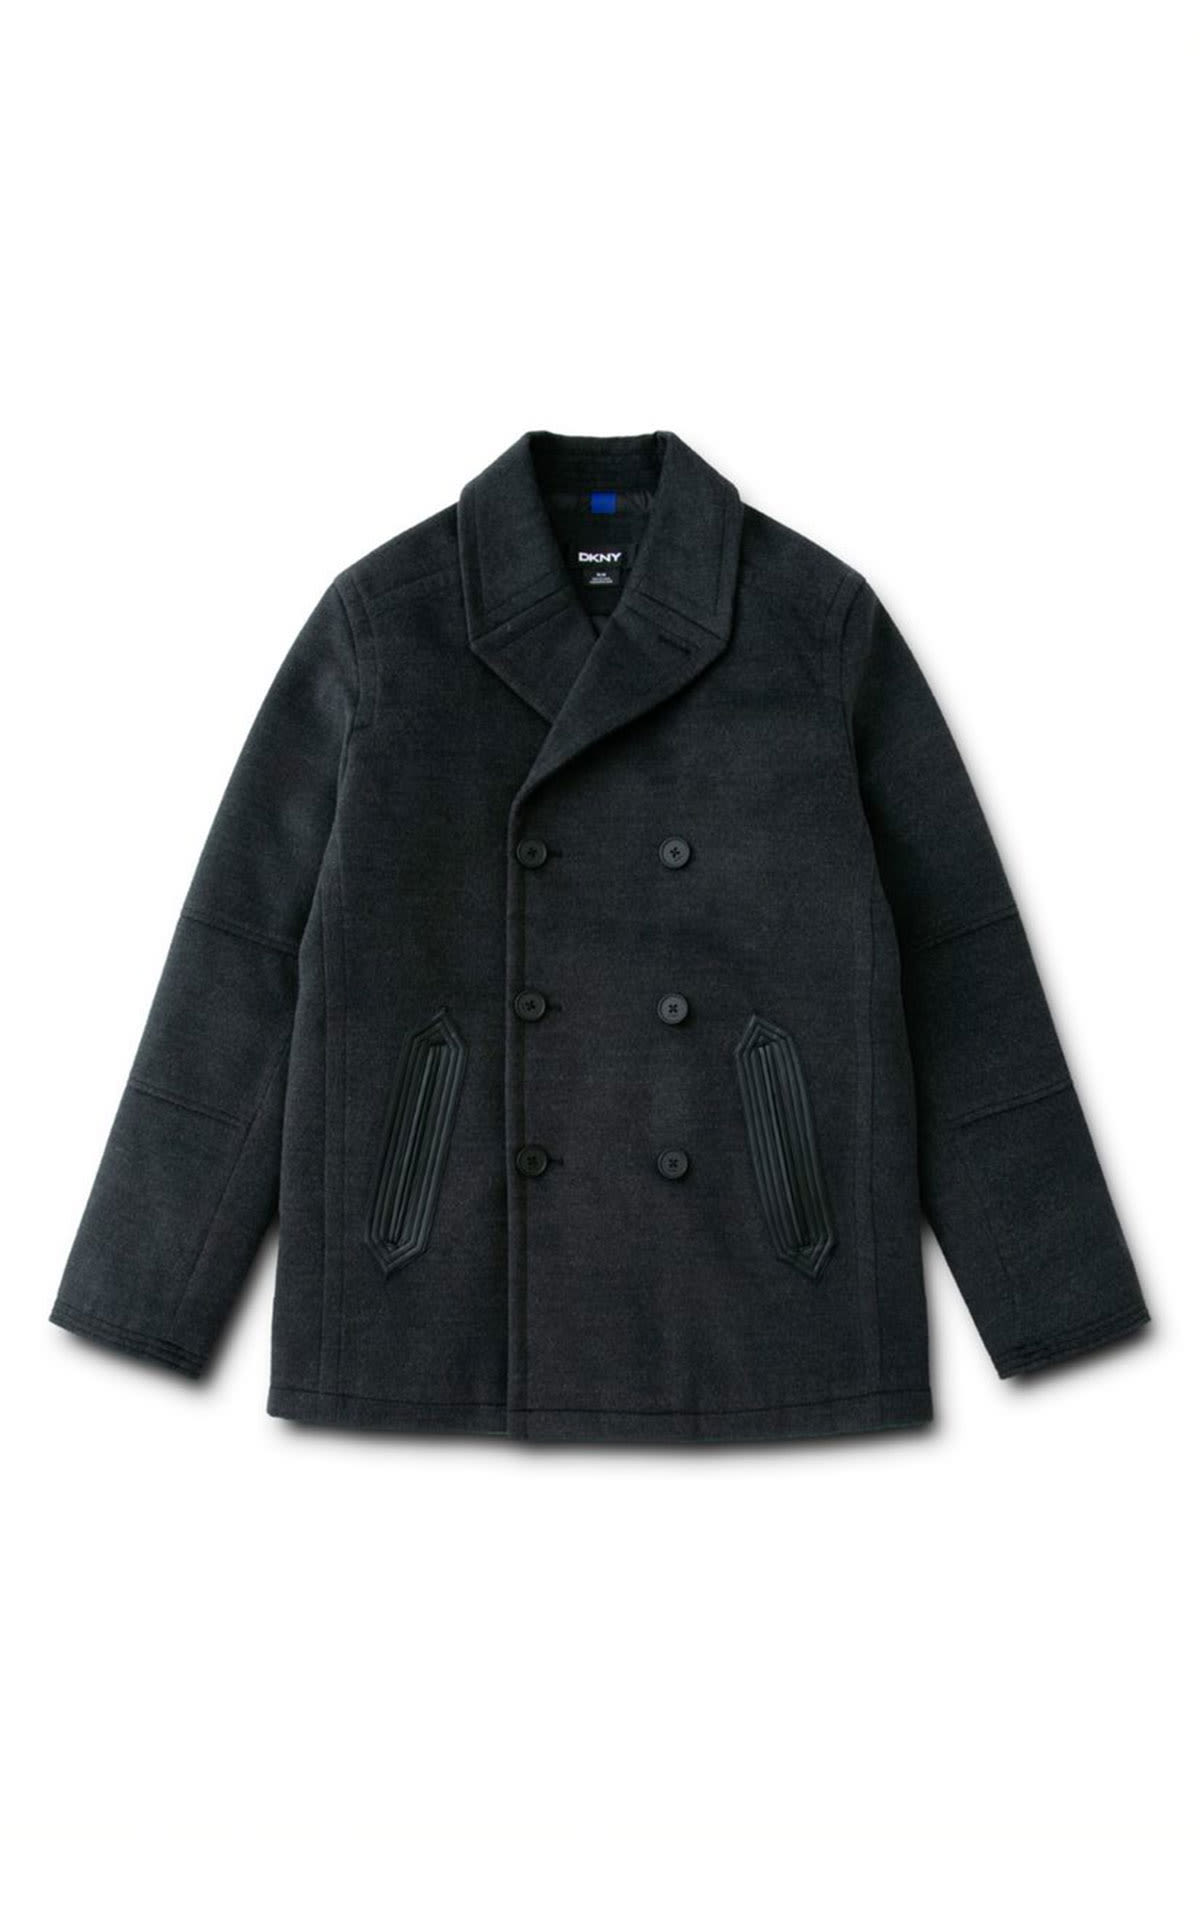 DKNY Wool blend notch collar coat without bib from Bicester Village